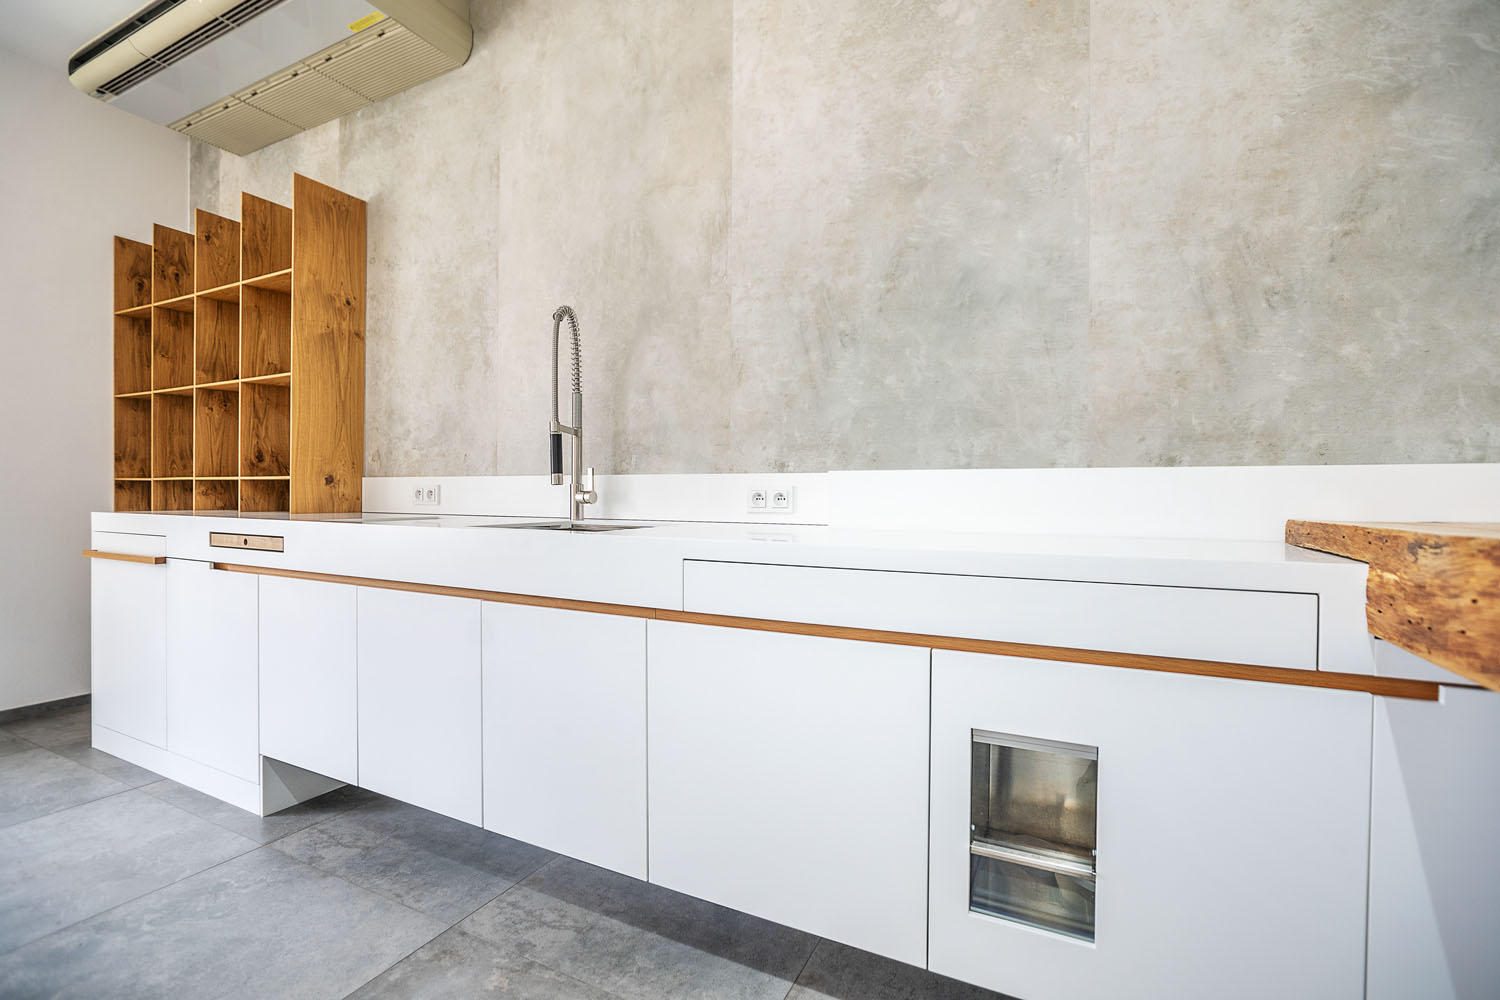 plan 3 kitchens / plan 3 kitchen Showroom in Zlin / kitchen with a potential to become a trend